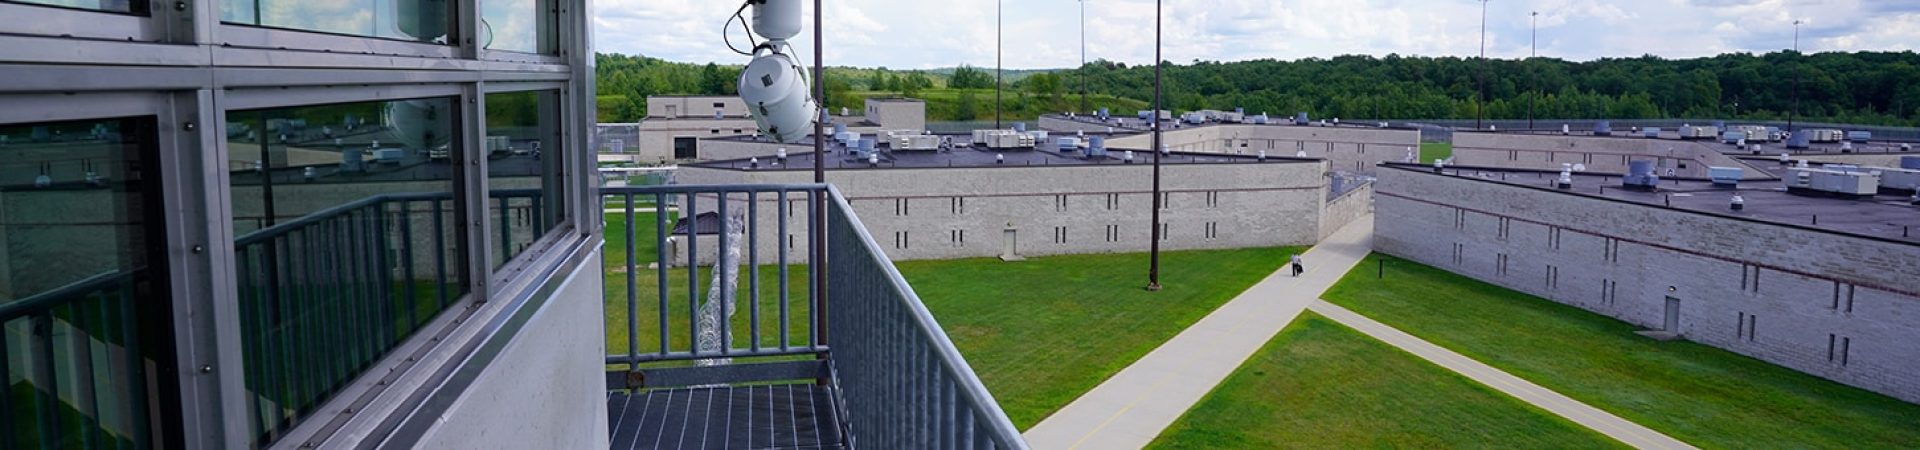 Featured Projects for High Security, Detention & Corrections